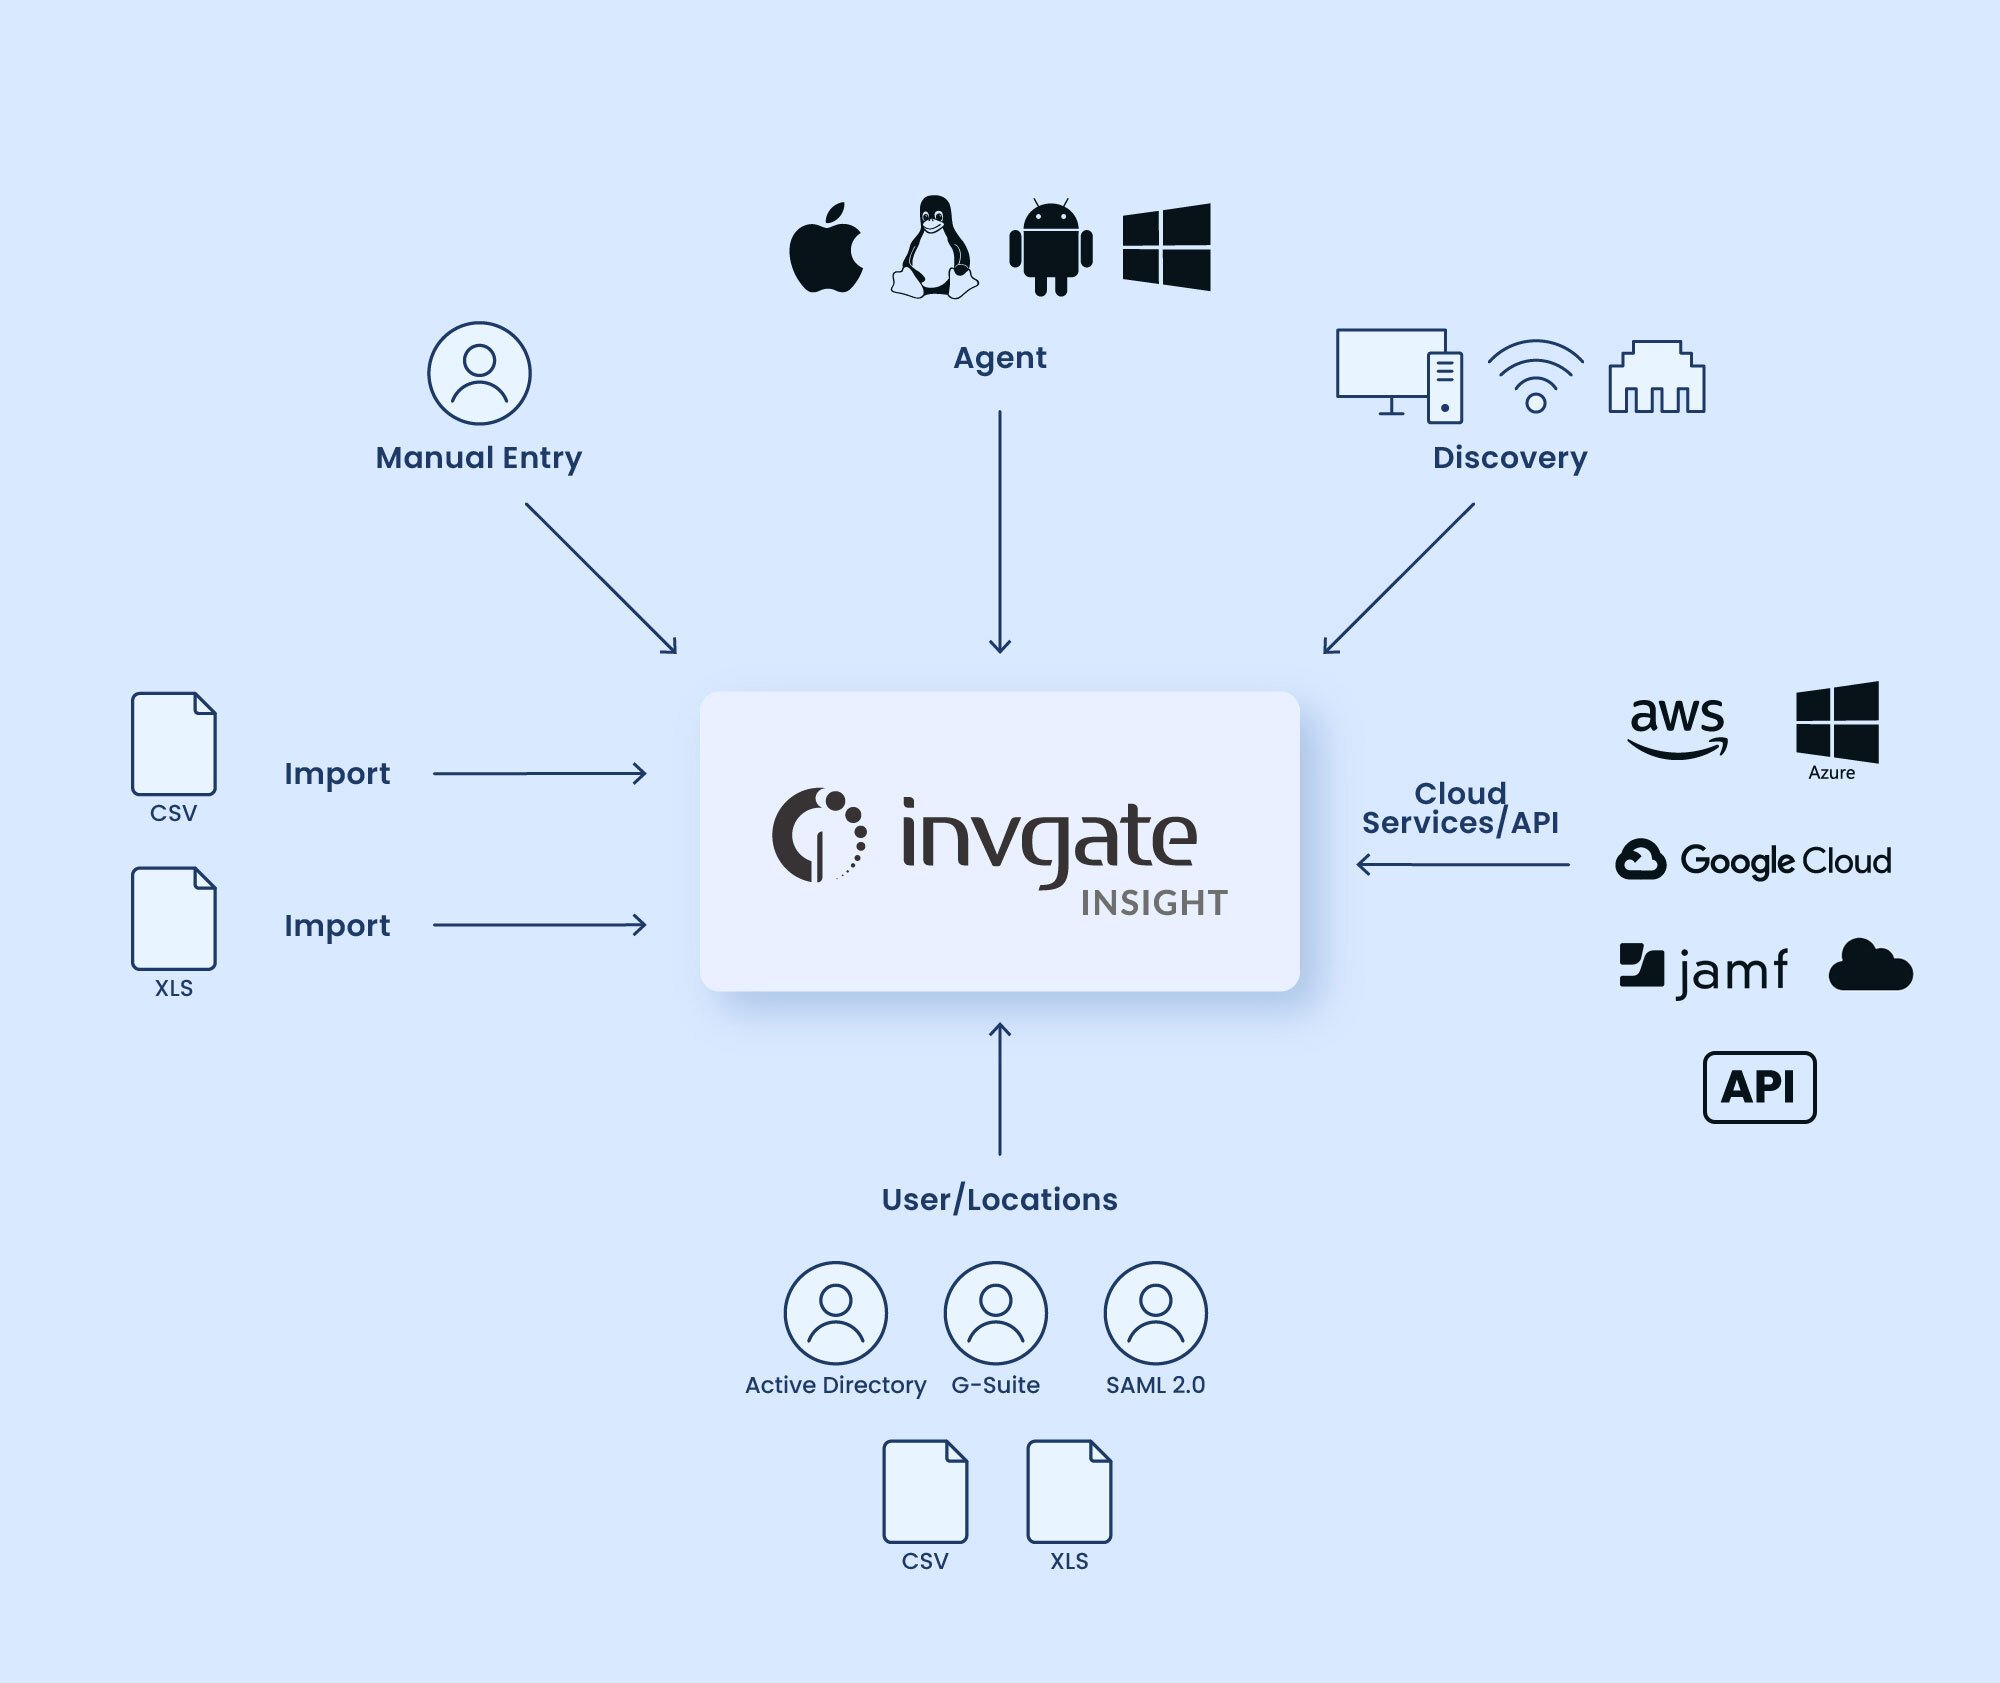 As opposed to using Excel for Asset Management, with InvGate Insight you can take advantage of multiple ways to discover and upload assets to your inventory.